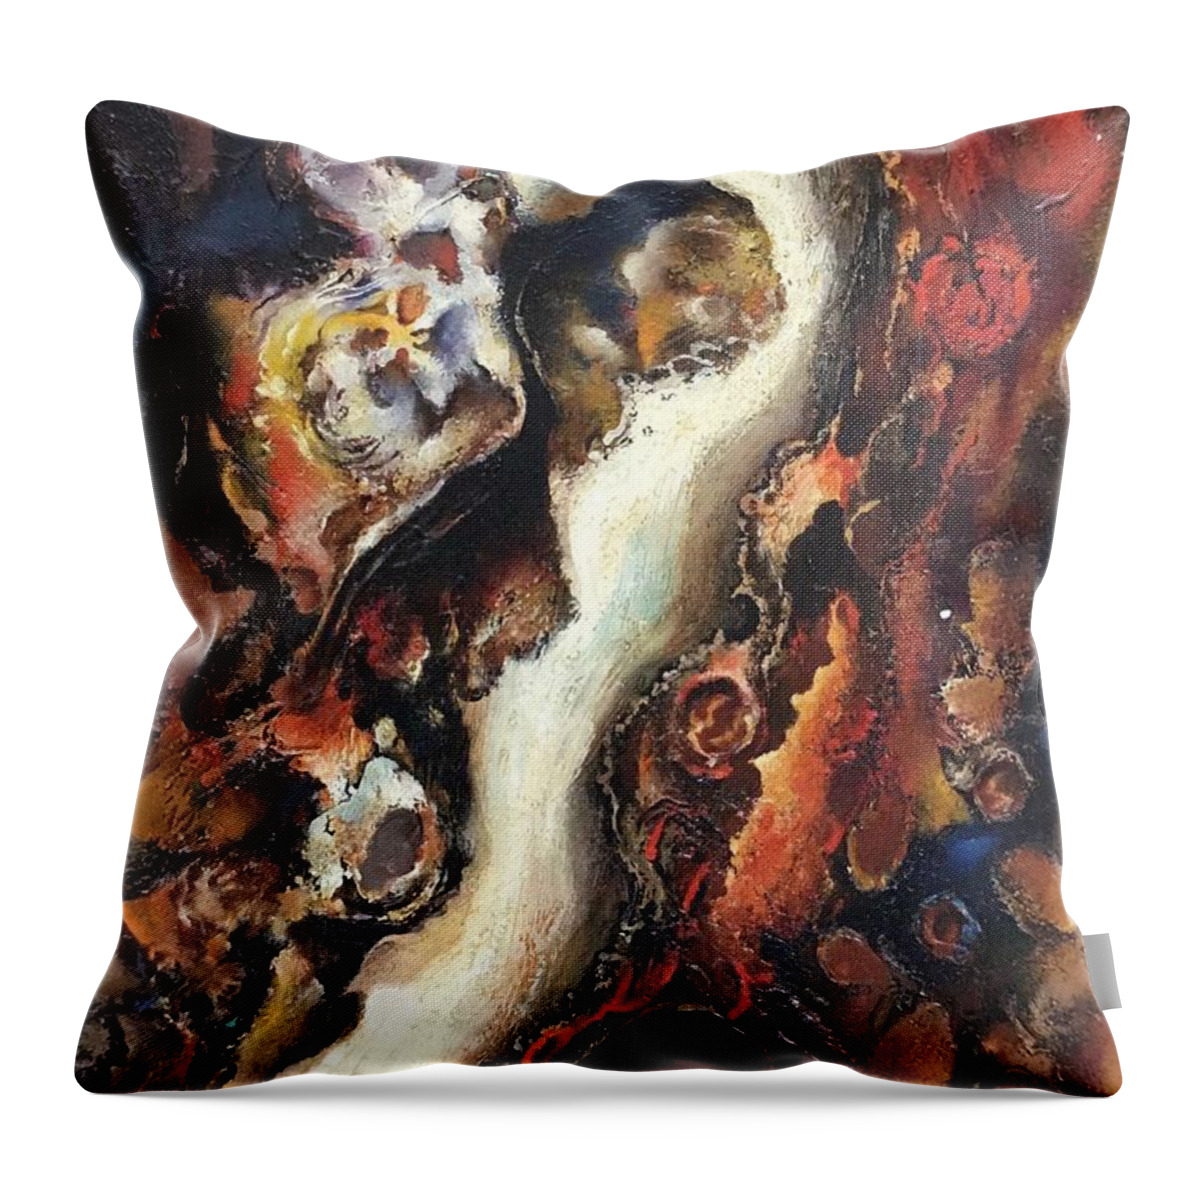 Ricardosart37 Throw Pillow featuring the painting Opening Night by Ricardo Penalver deceased